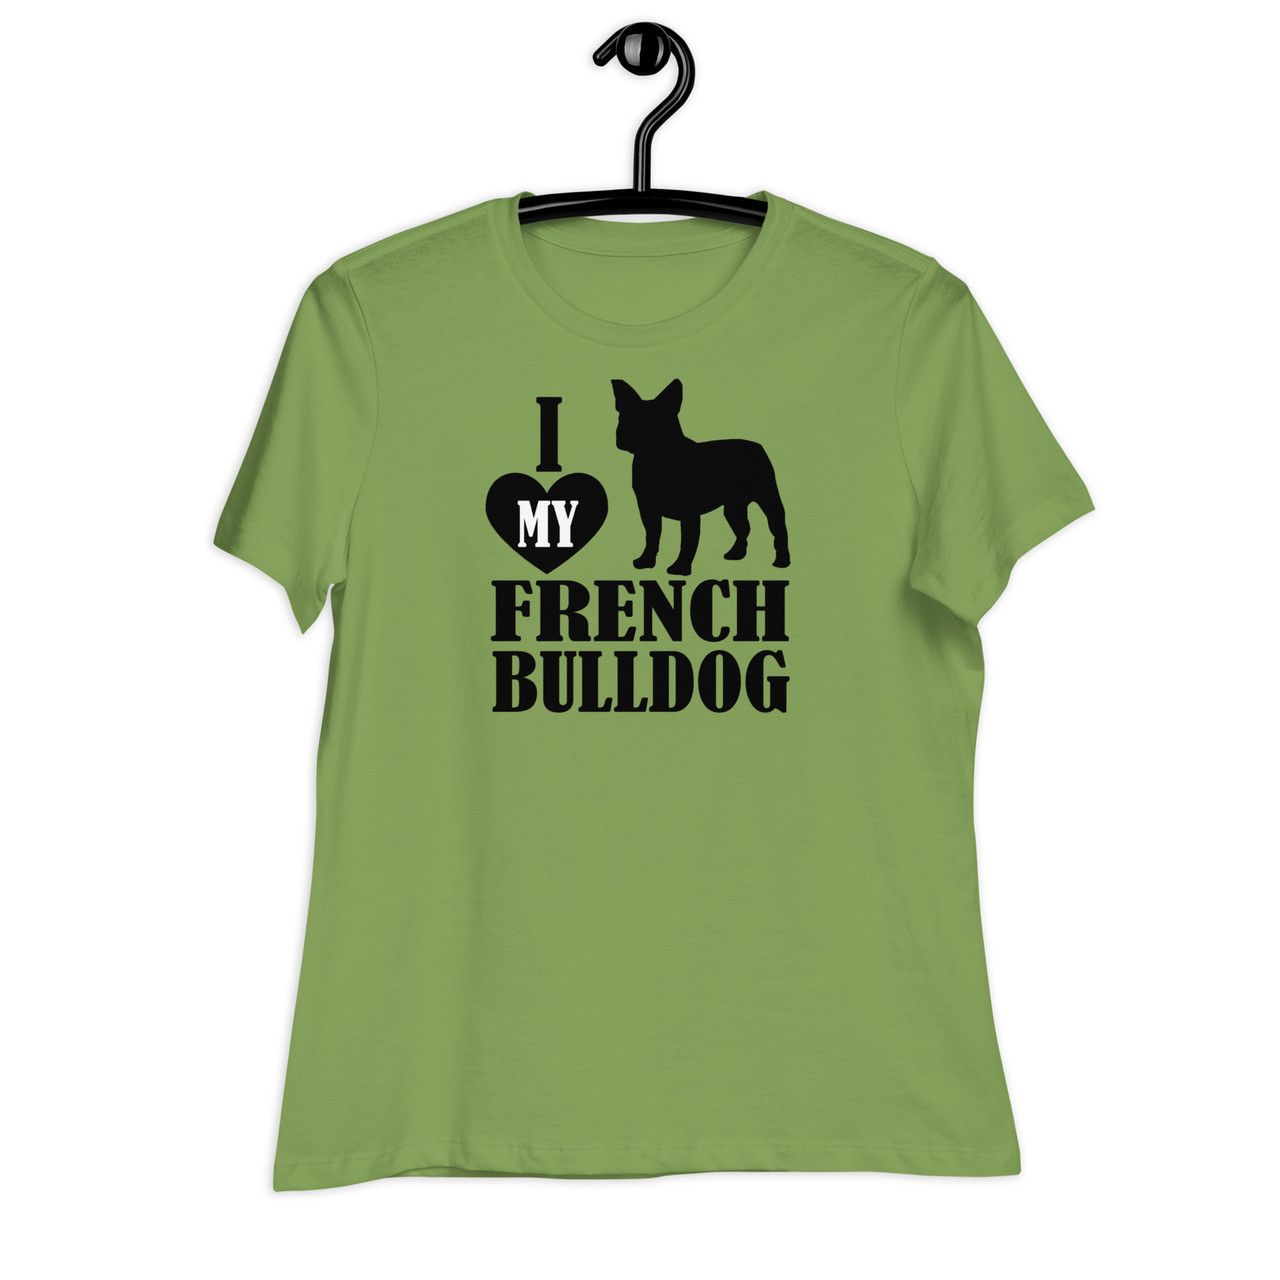 I Love My French Bulldog Women's Relaxed T-Shirt - Bella + Canvas 6400